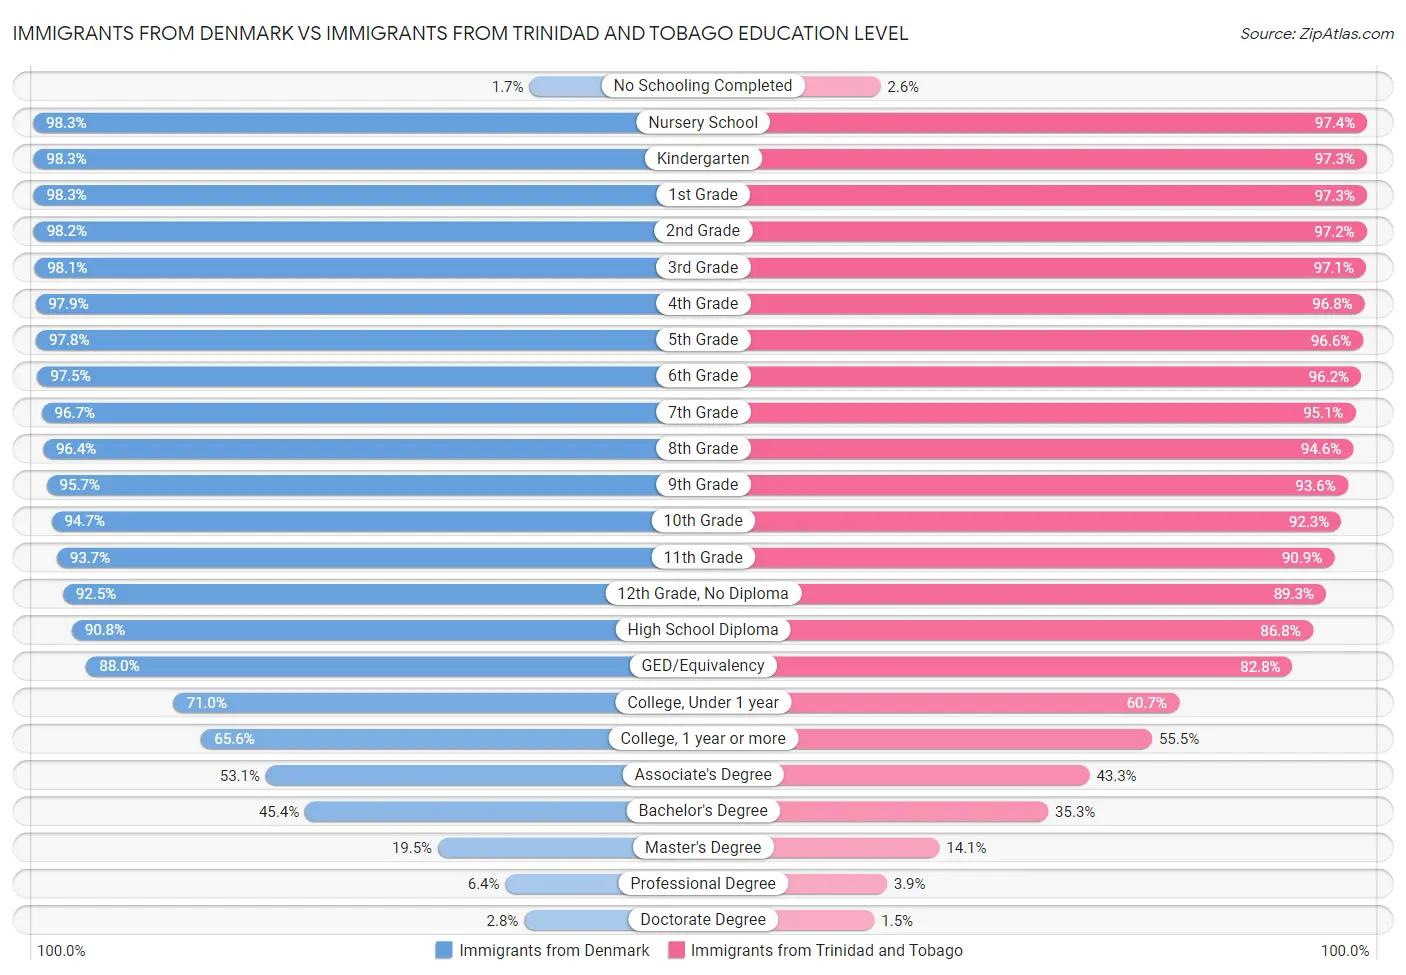 Immigrants from Denmark vs Immigrants from Trinidad and Tobago Education Level